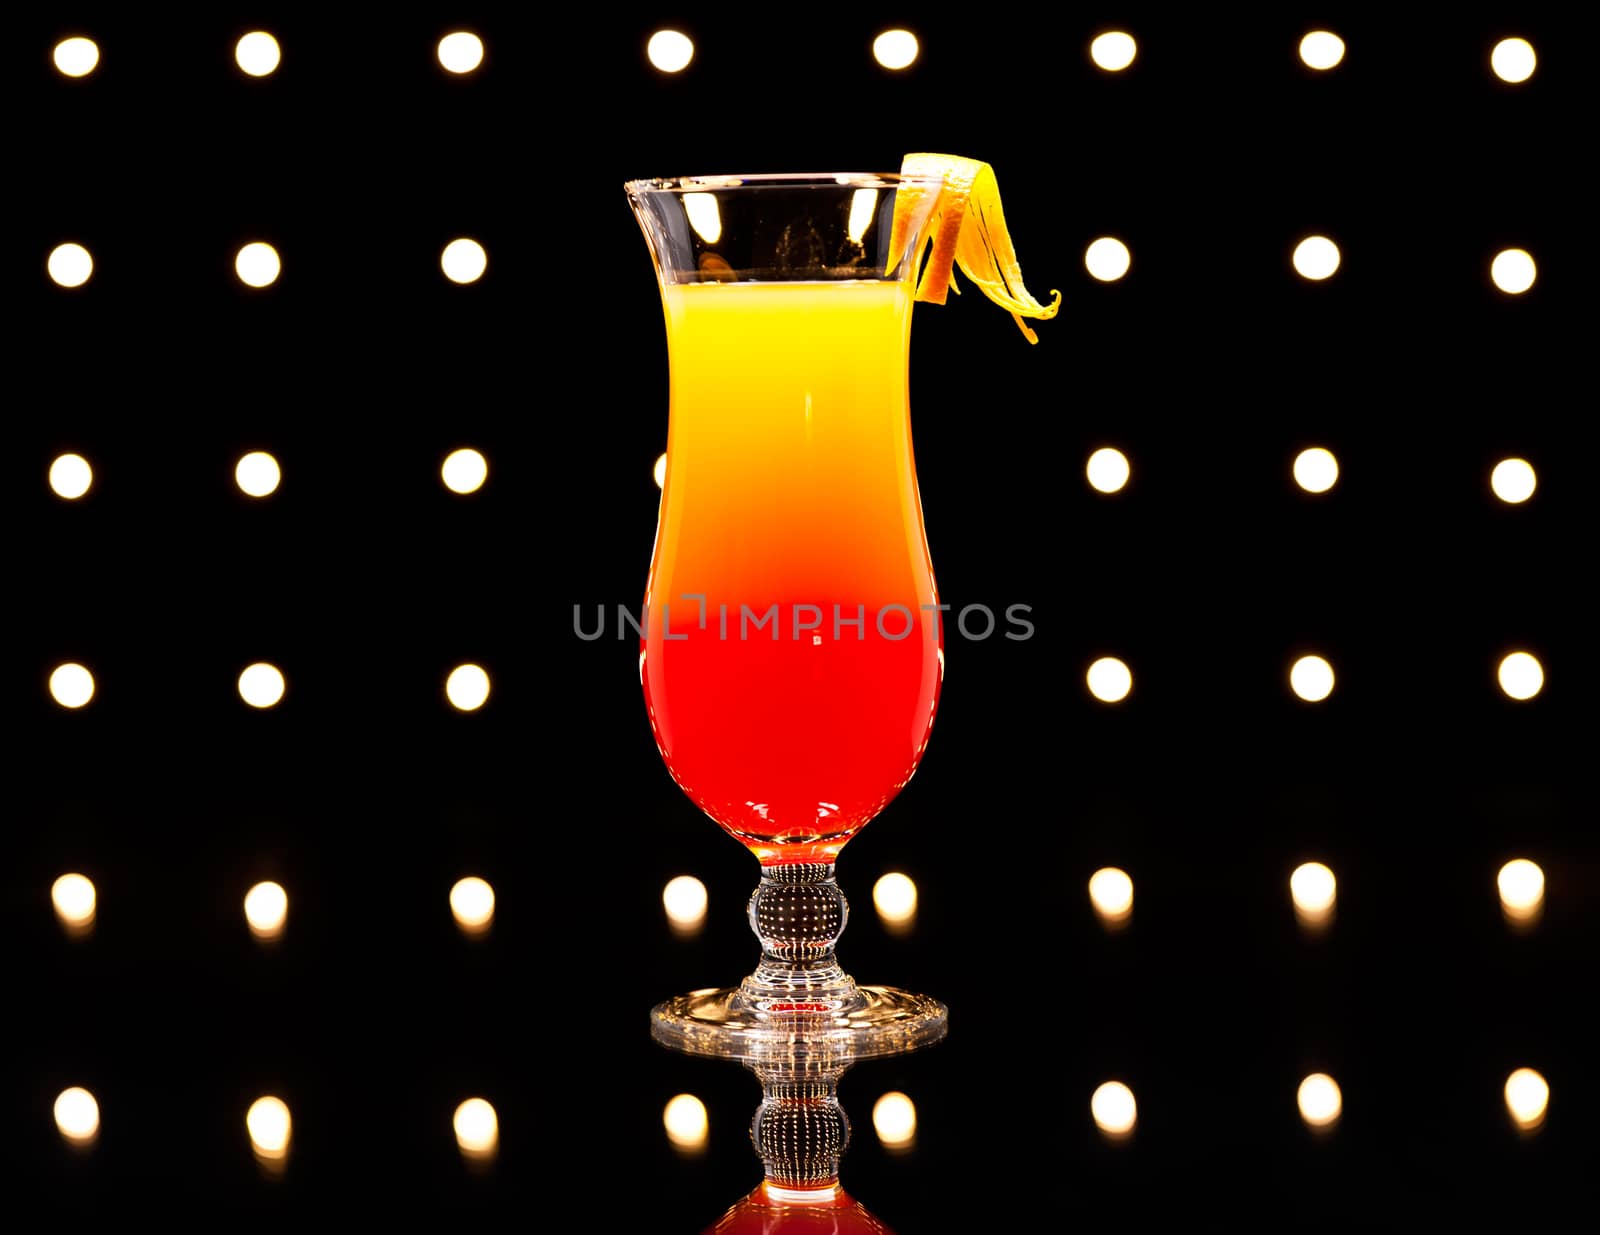 Tequila Sunrise cocktail in front of Disco lights